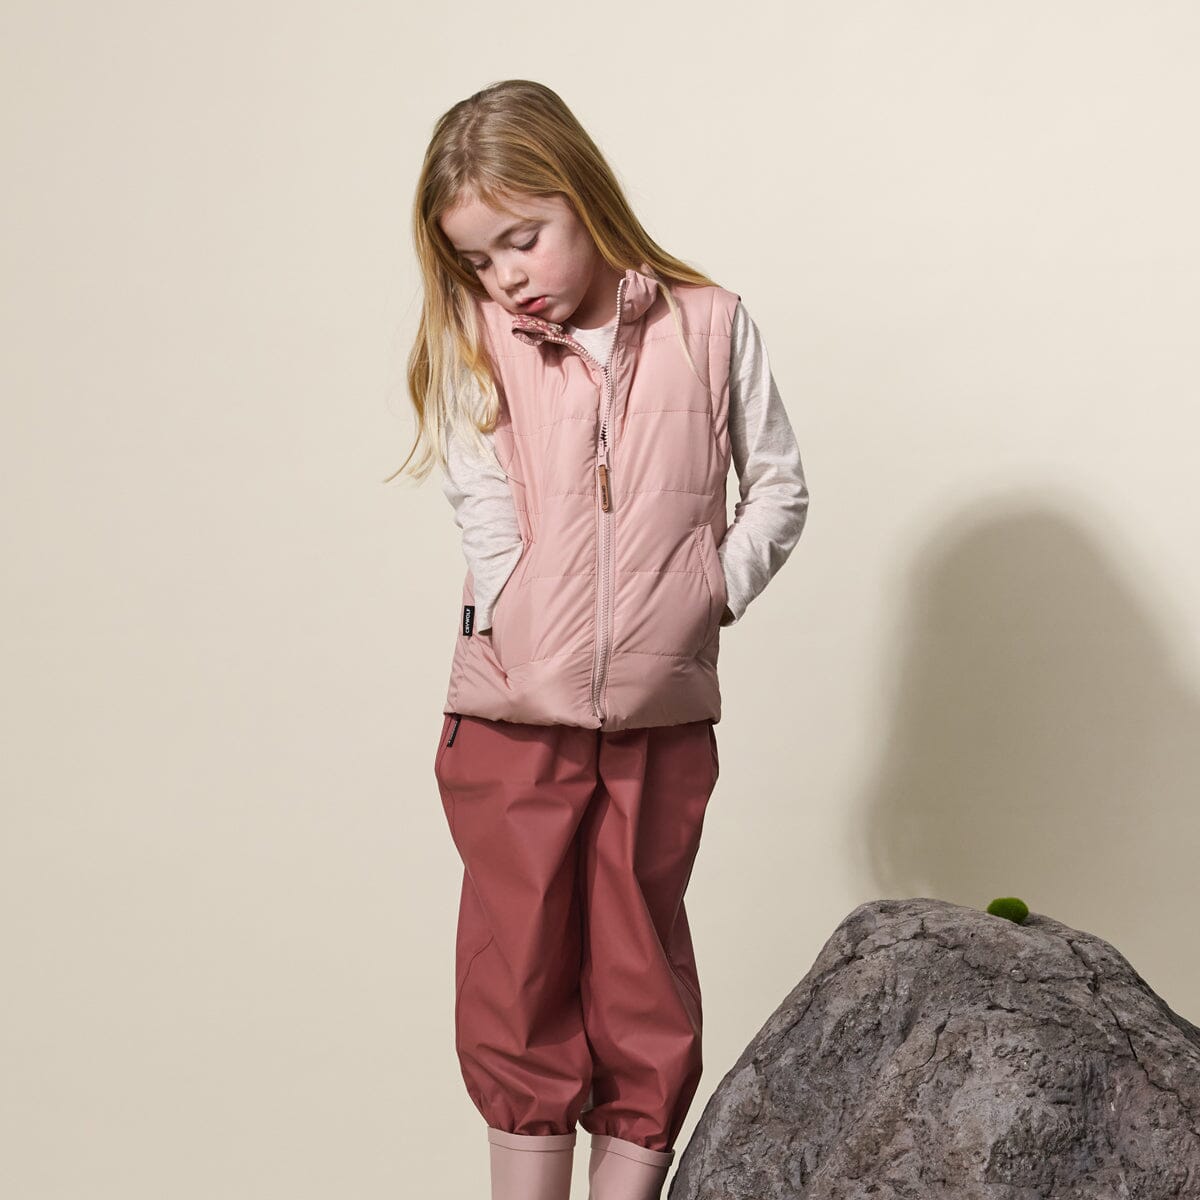 Crywolf | REVERSIBLE VEST - Rosewood Floral *** PRE ORDER / DUE EARLY-MID APRIL *** Girls Crywolf